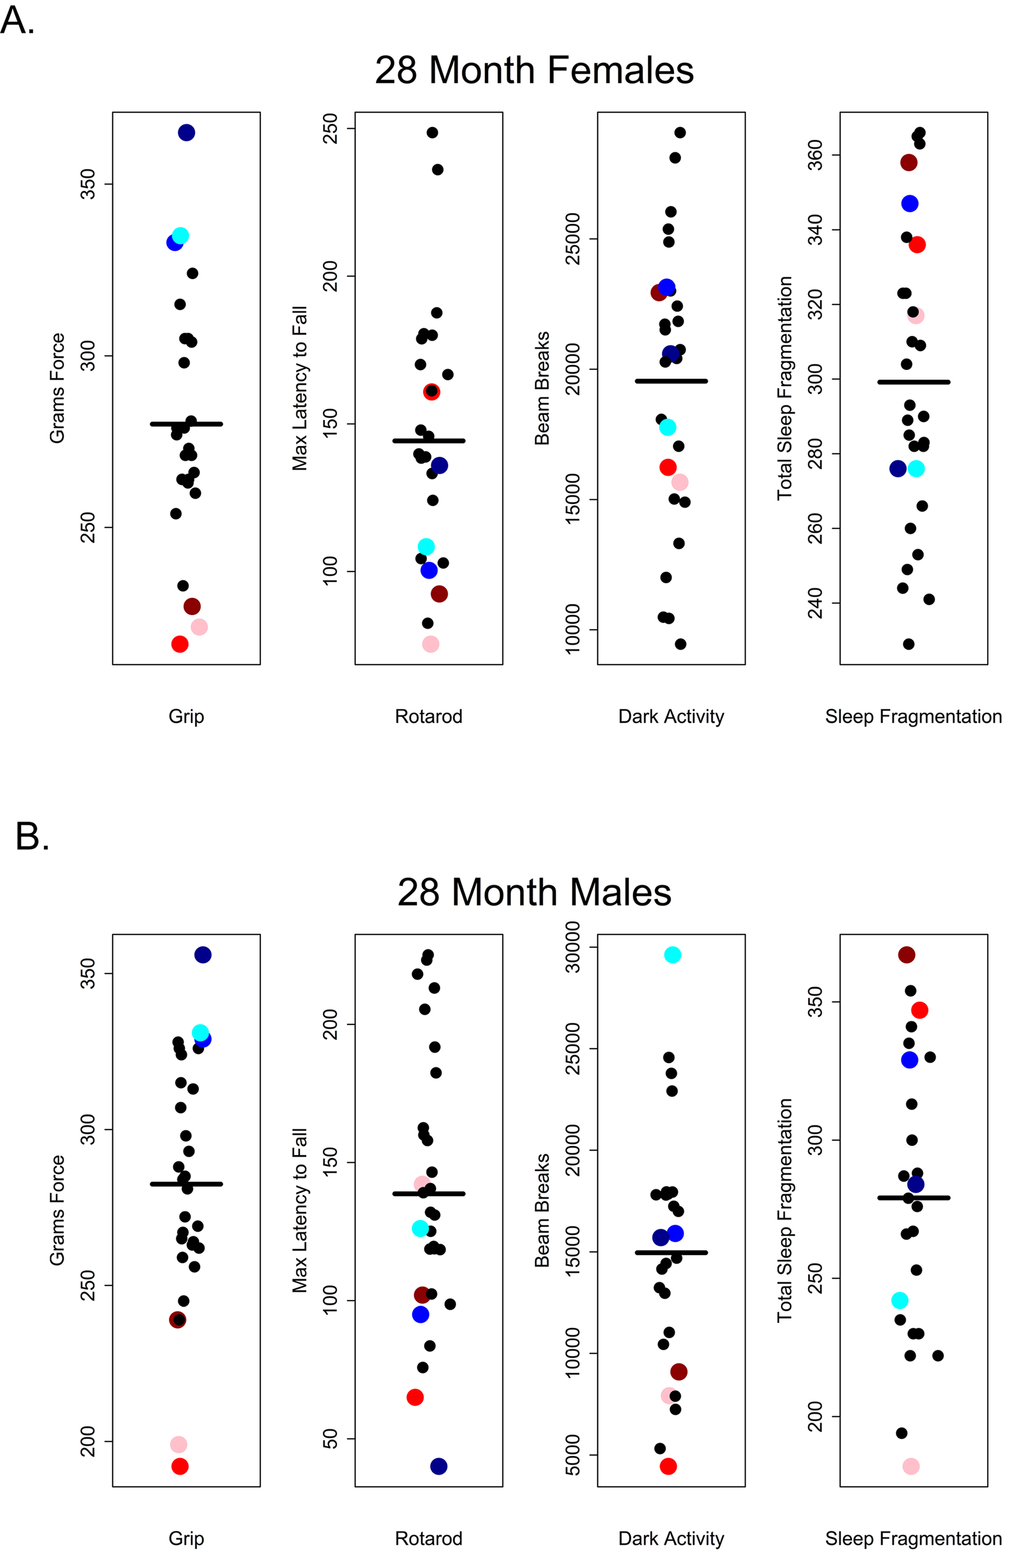 Grip strength does not predict rotarod performance, dark phase activity or sleep fragmentation in 28-month-old mice. Visual representation of the relative performance on four healthspan measures by 28-month-old mice. Mice performing best (blue symbols) and worst (red symbols) on the grip strength test, did not perform similarly on other measures of healthspan in females (A) and males (B). Correlations and p-values are in Tables 2 and 3.